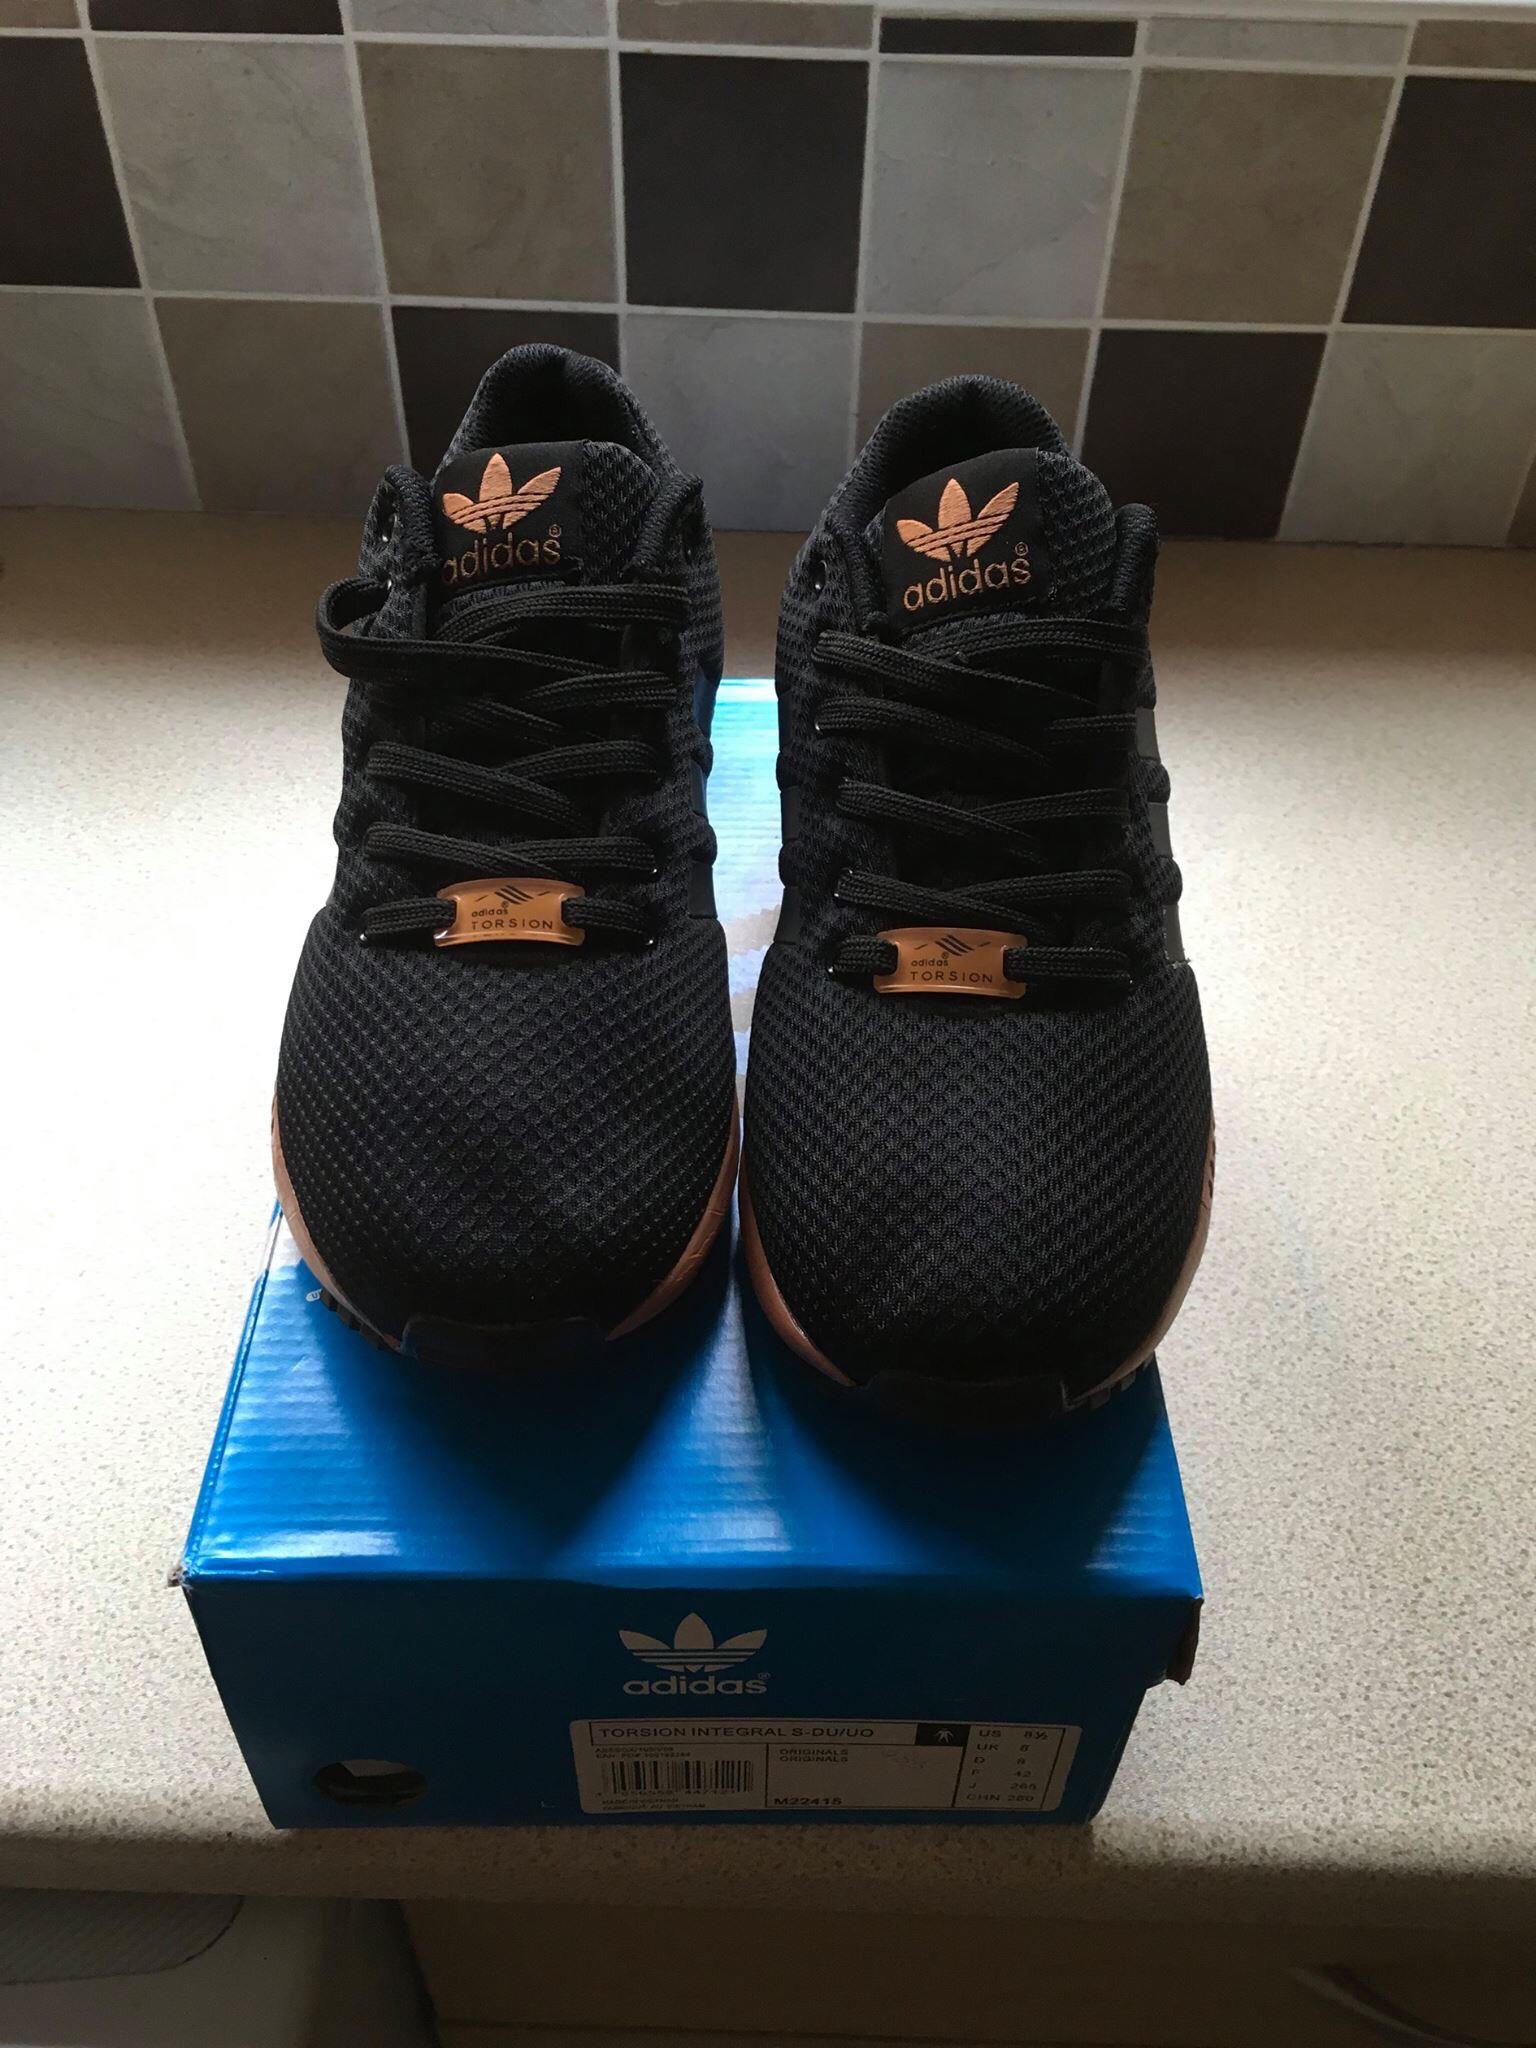 adidas flux black and rose gold